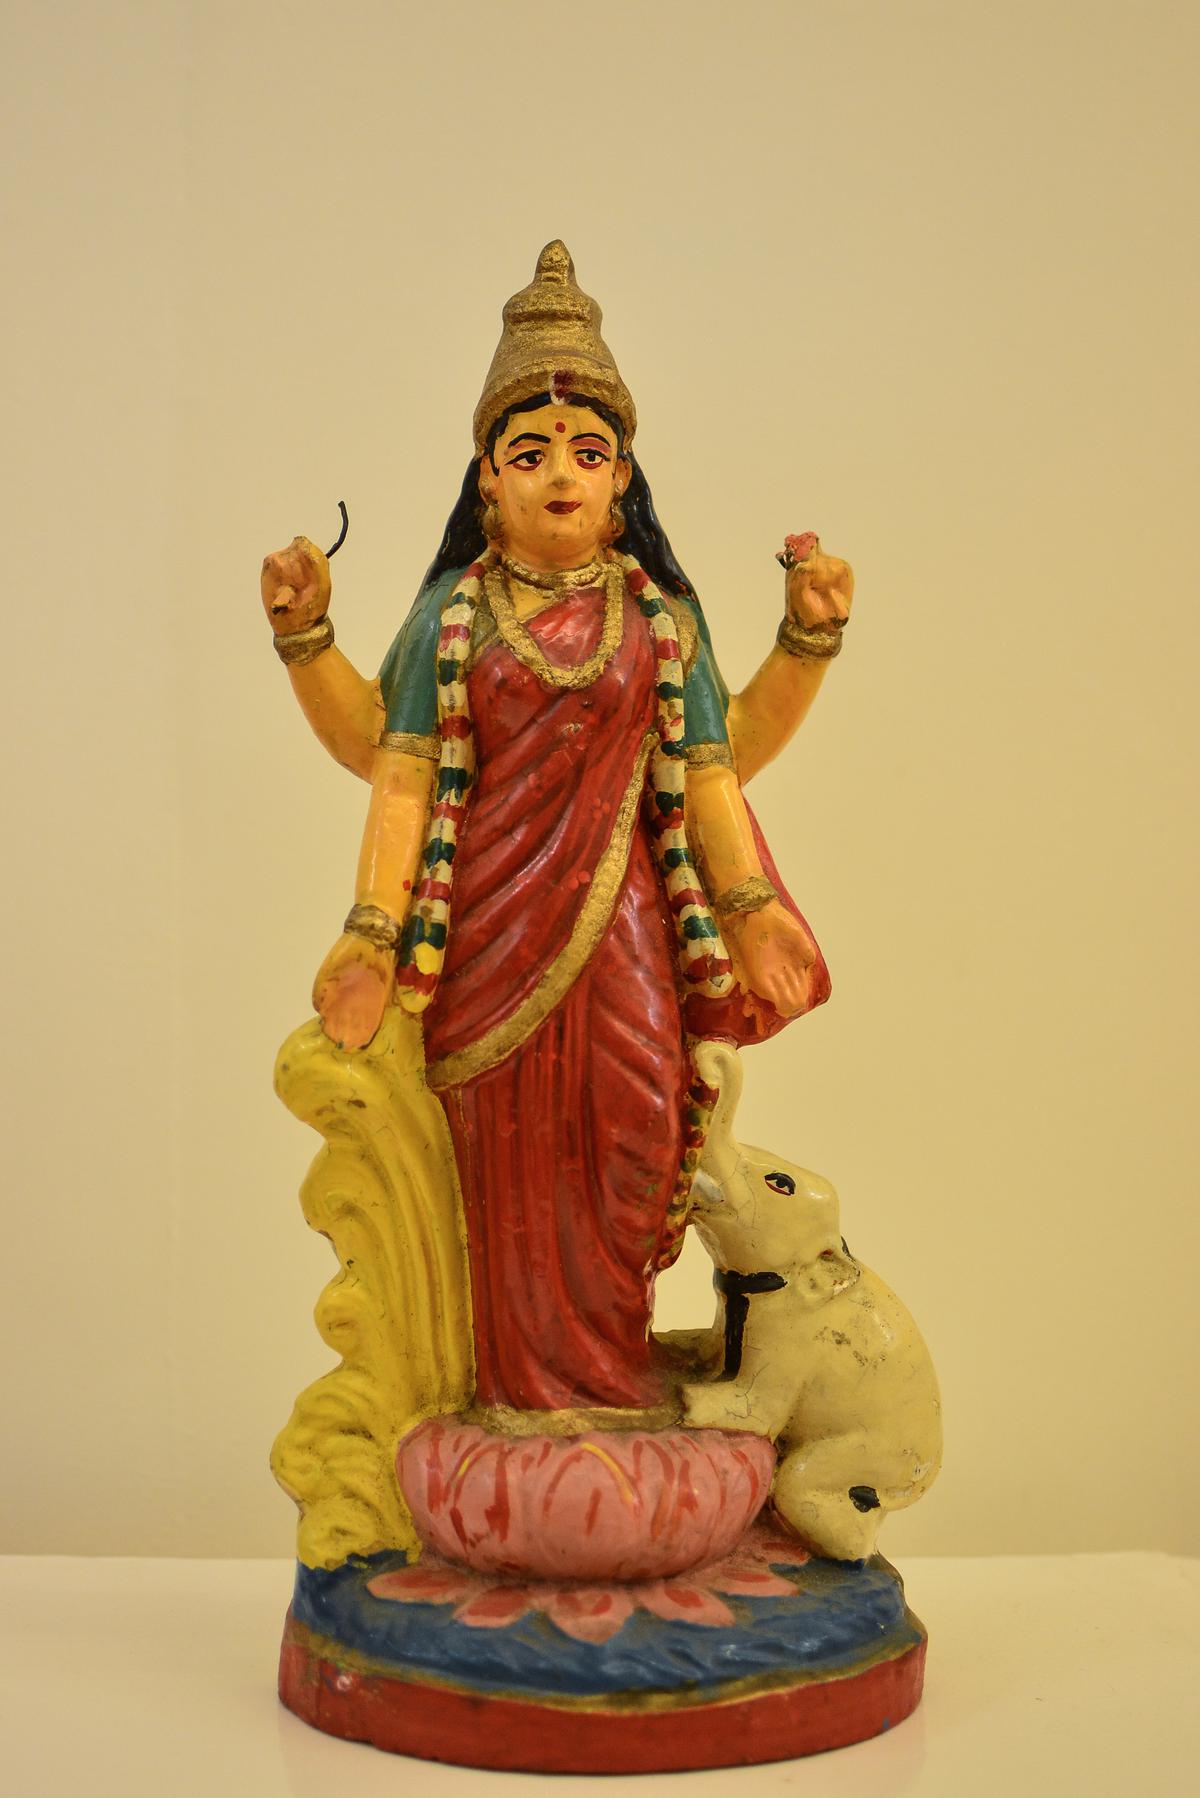 A terracotta Laxmi figurine from Revelations and Reverences 